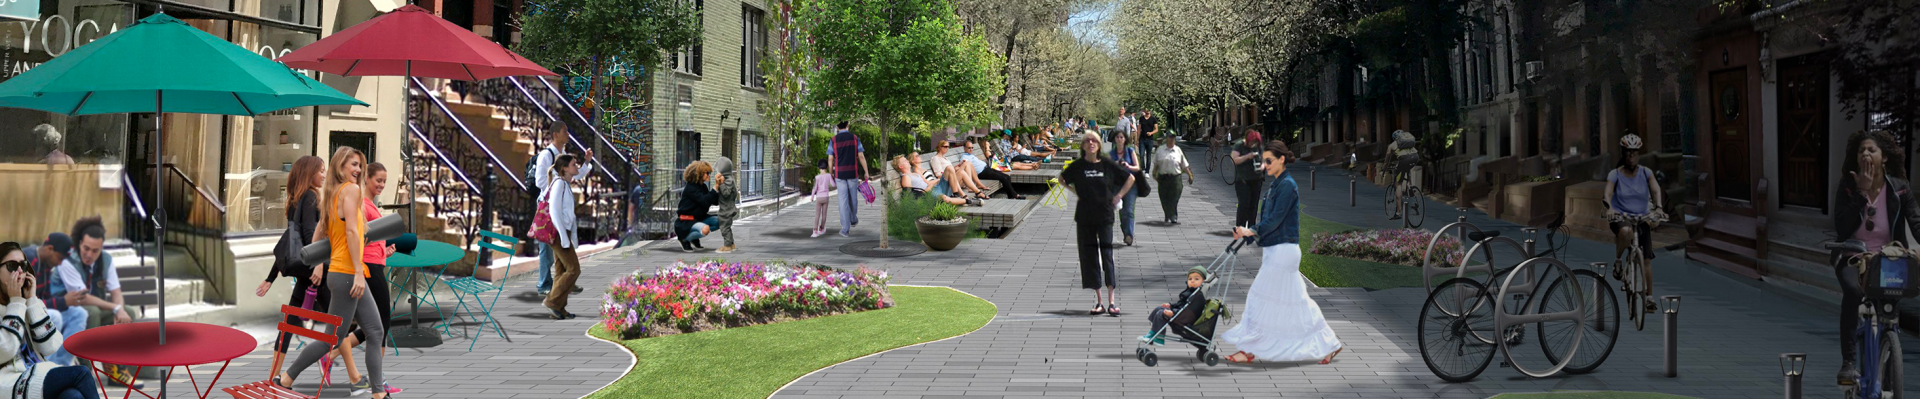 Street Plans + Place Partners Pop-Up Park in Penrith, Australia to Become Permanent